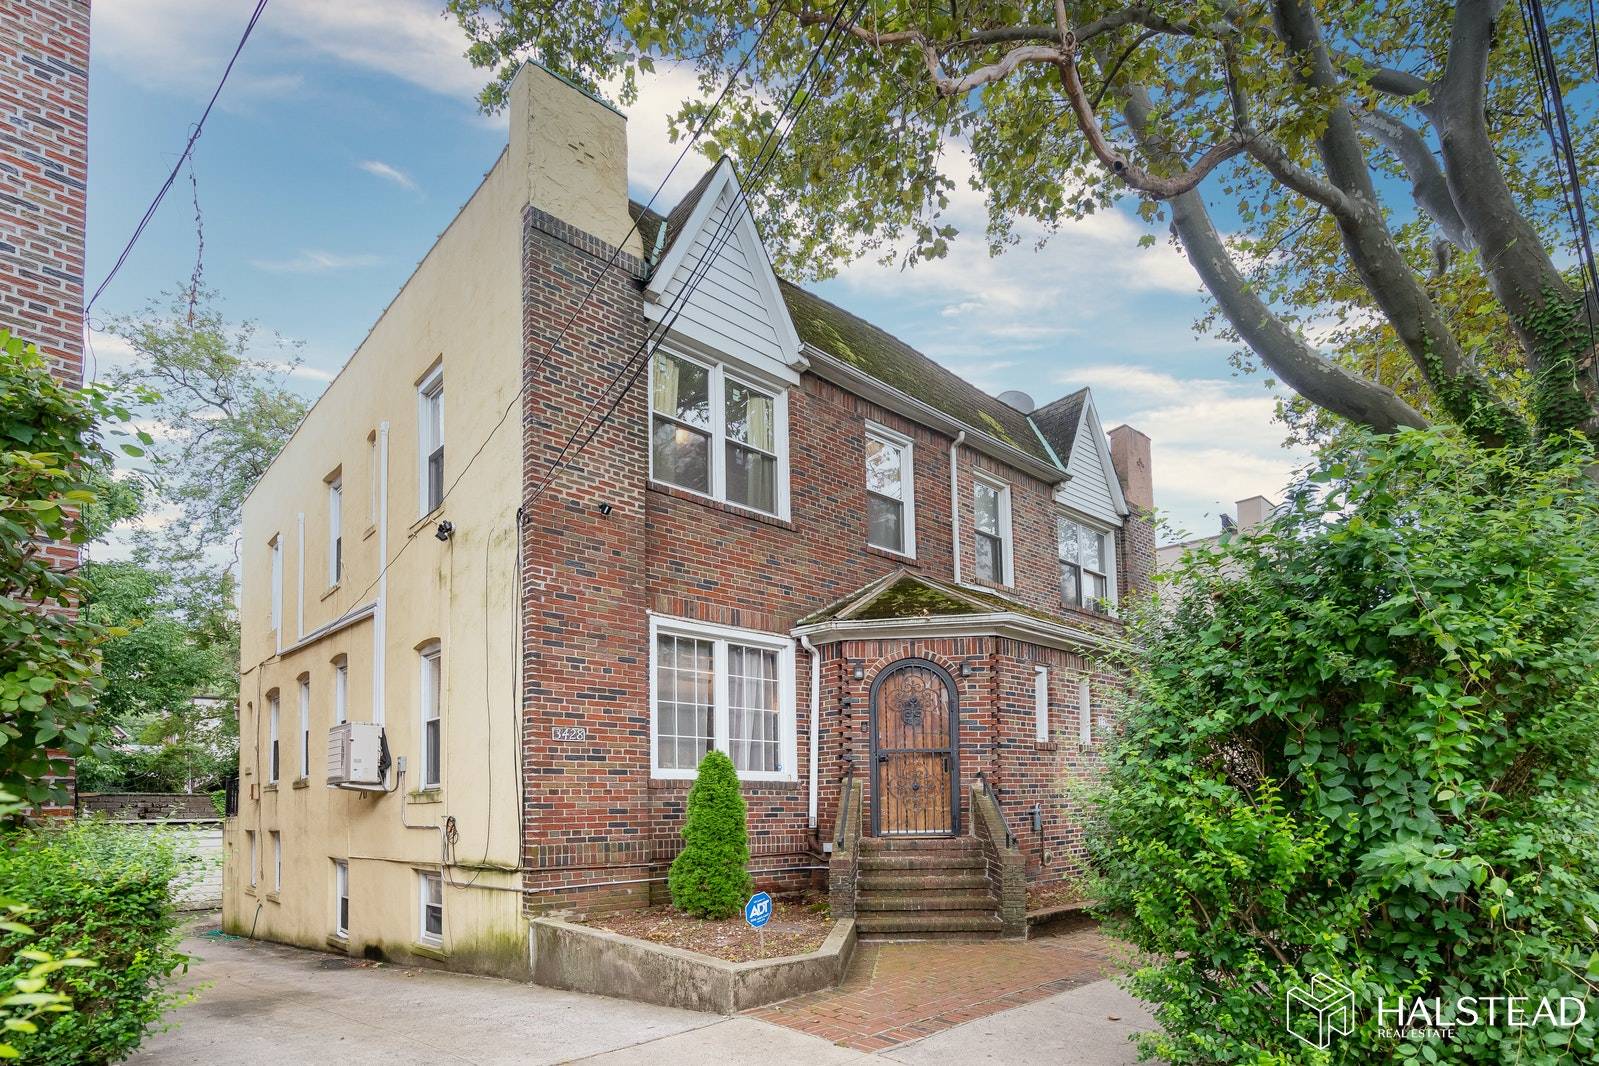 A prewar Brick and Stucco colonial with all its details and charm with Sunken living room, Formal dining room, Inlaid Hardwood flooring amp ; high Ceilings.